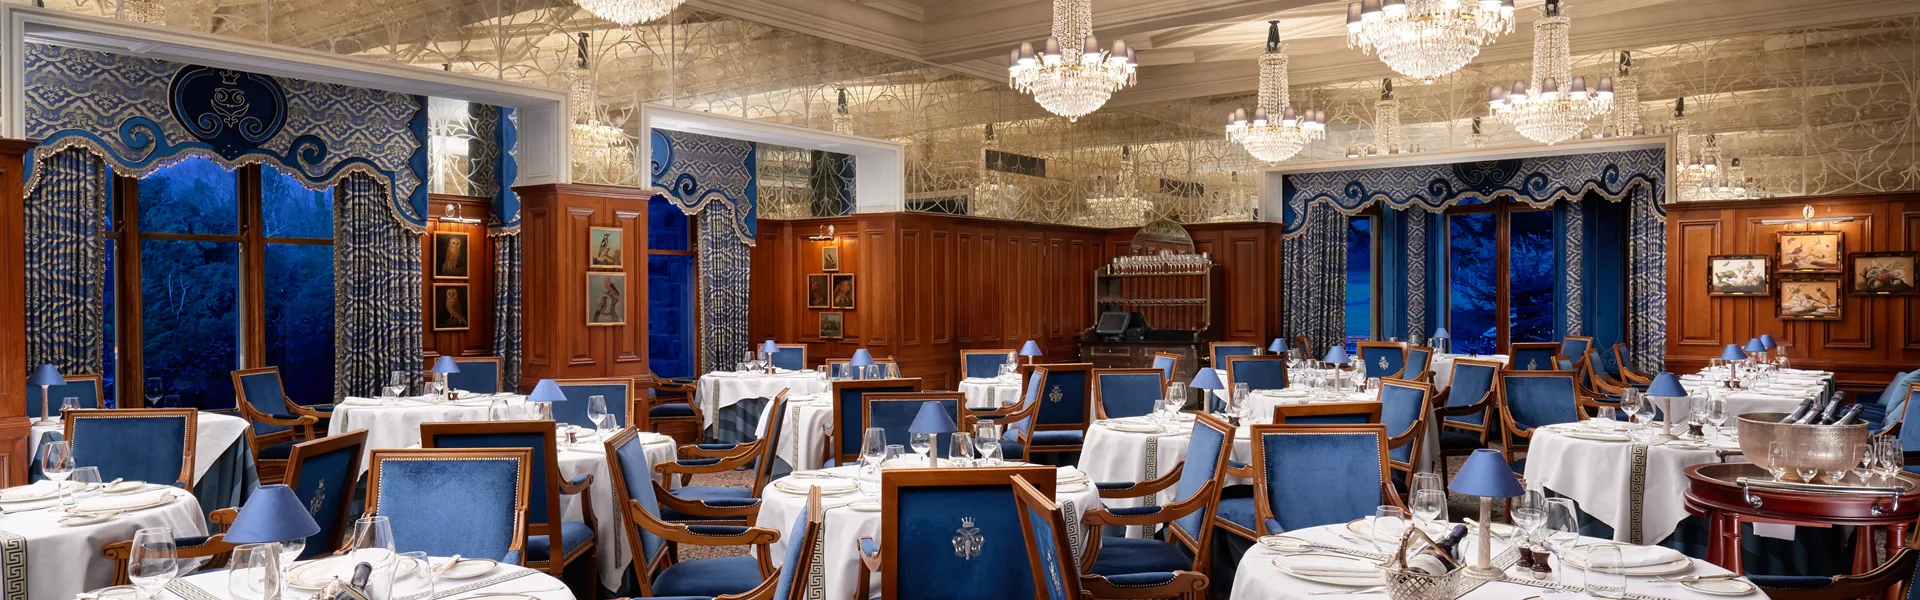 Enjoy the finest dining in Ireland and Scotland